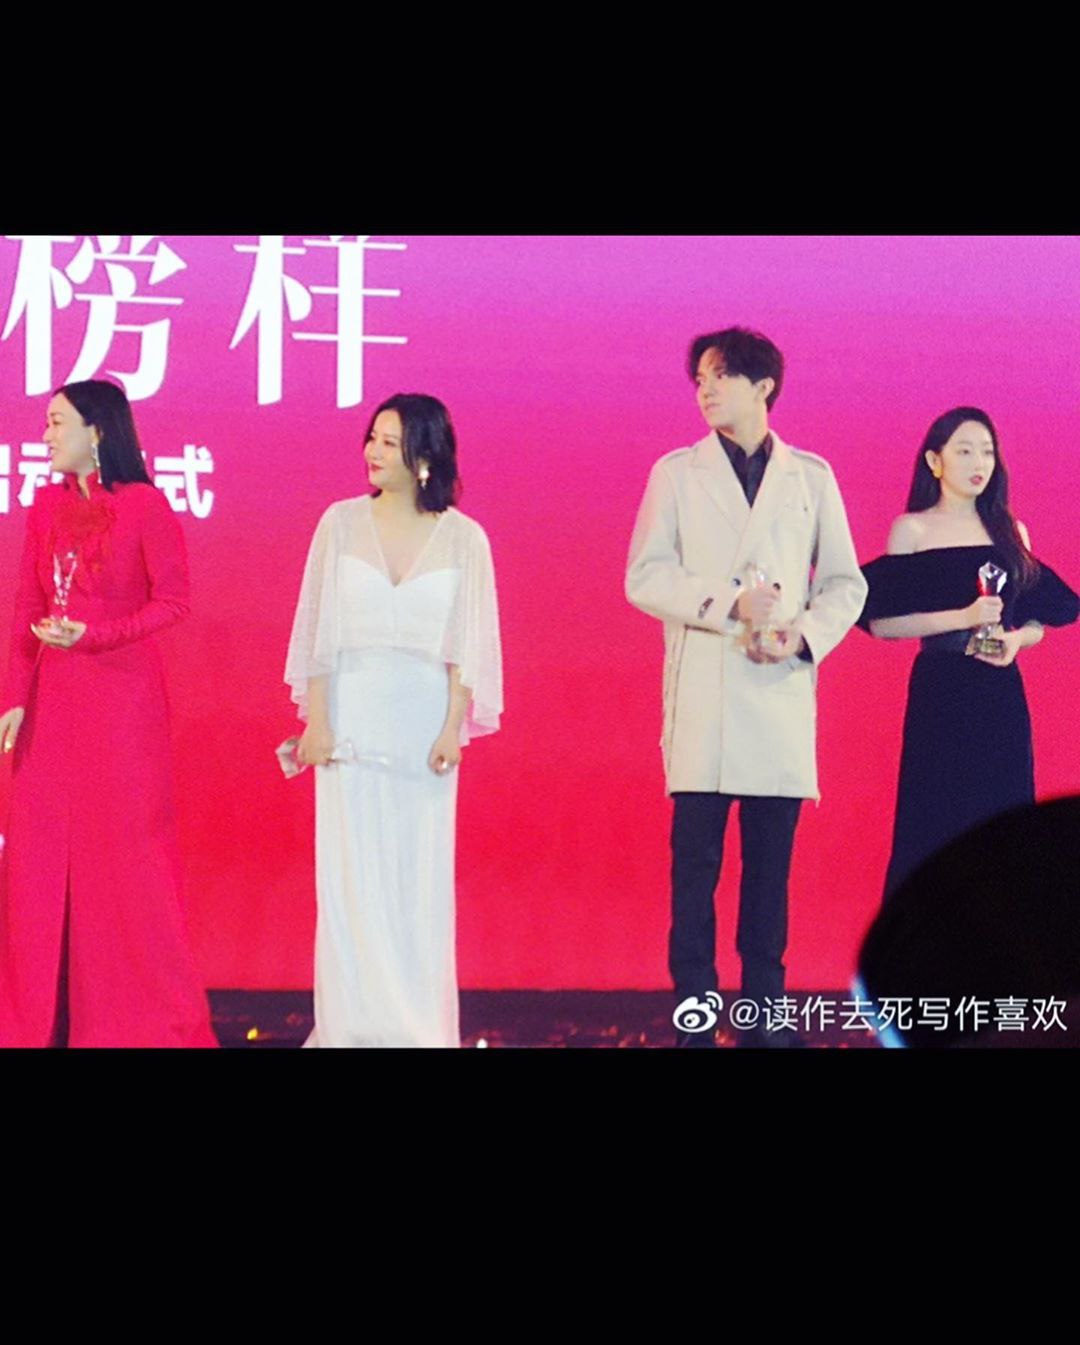 Dimash Kudaibergen becomes the best singer of the year in China